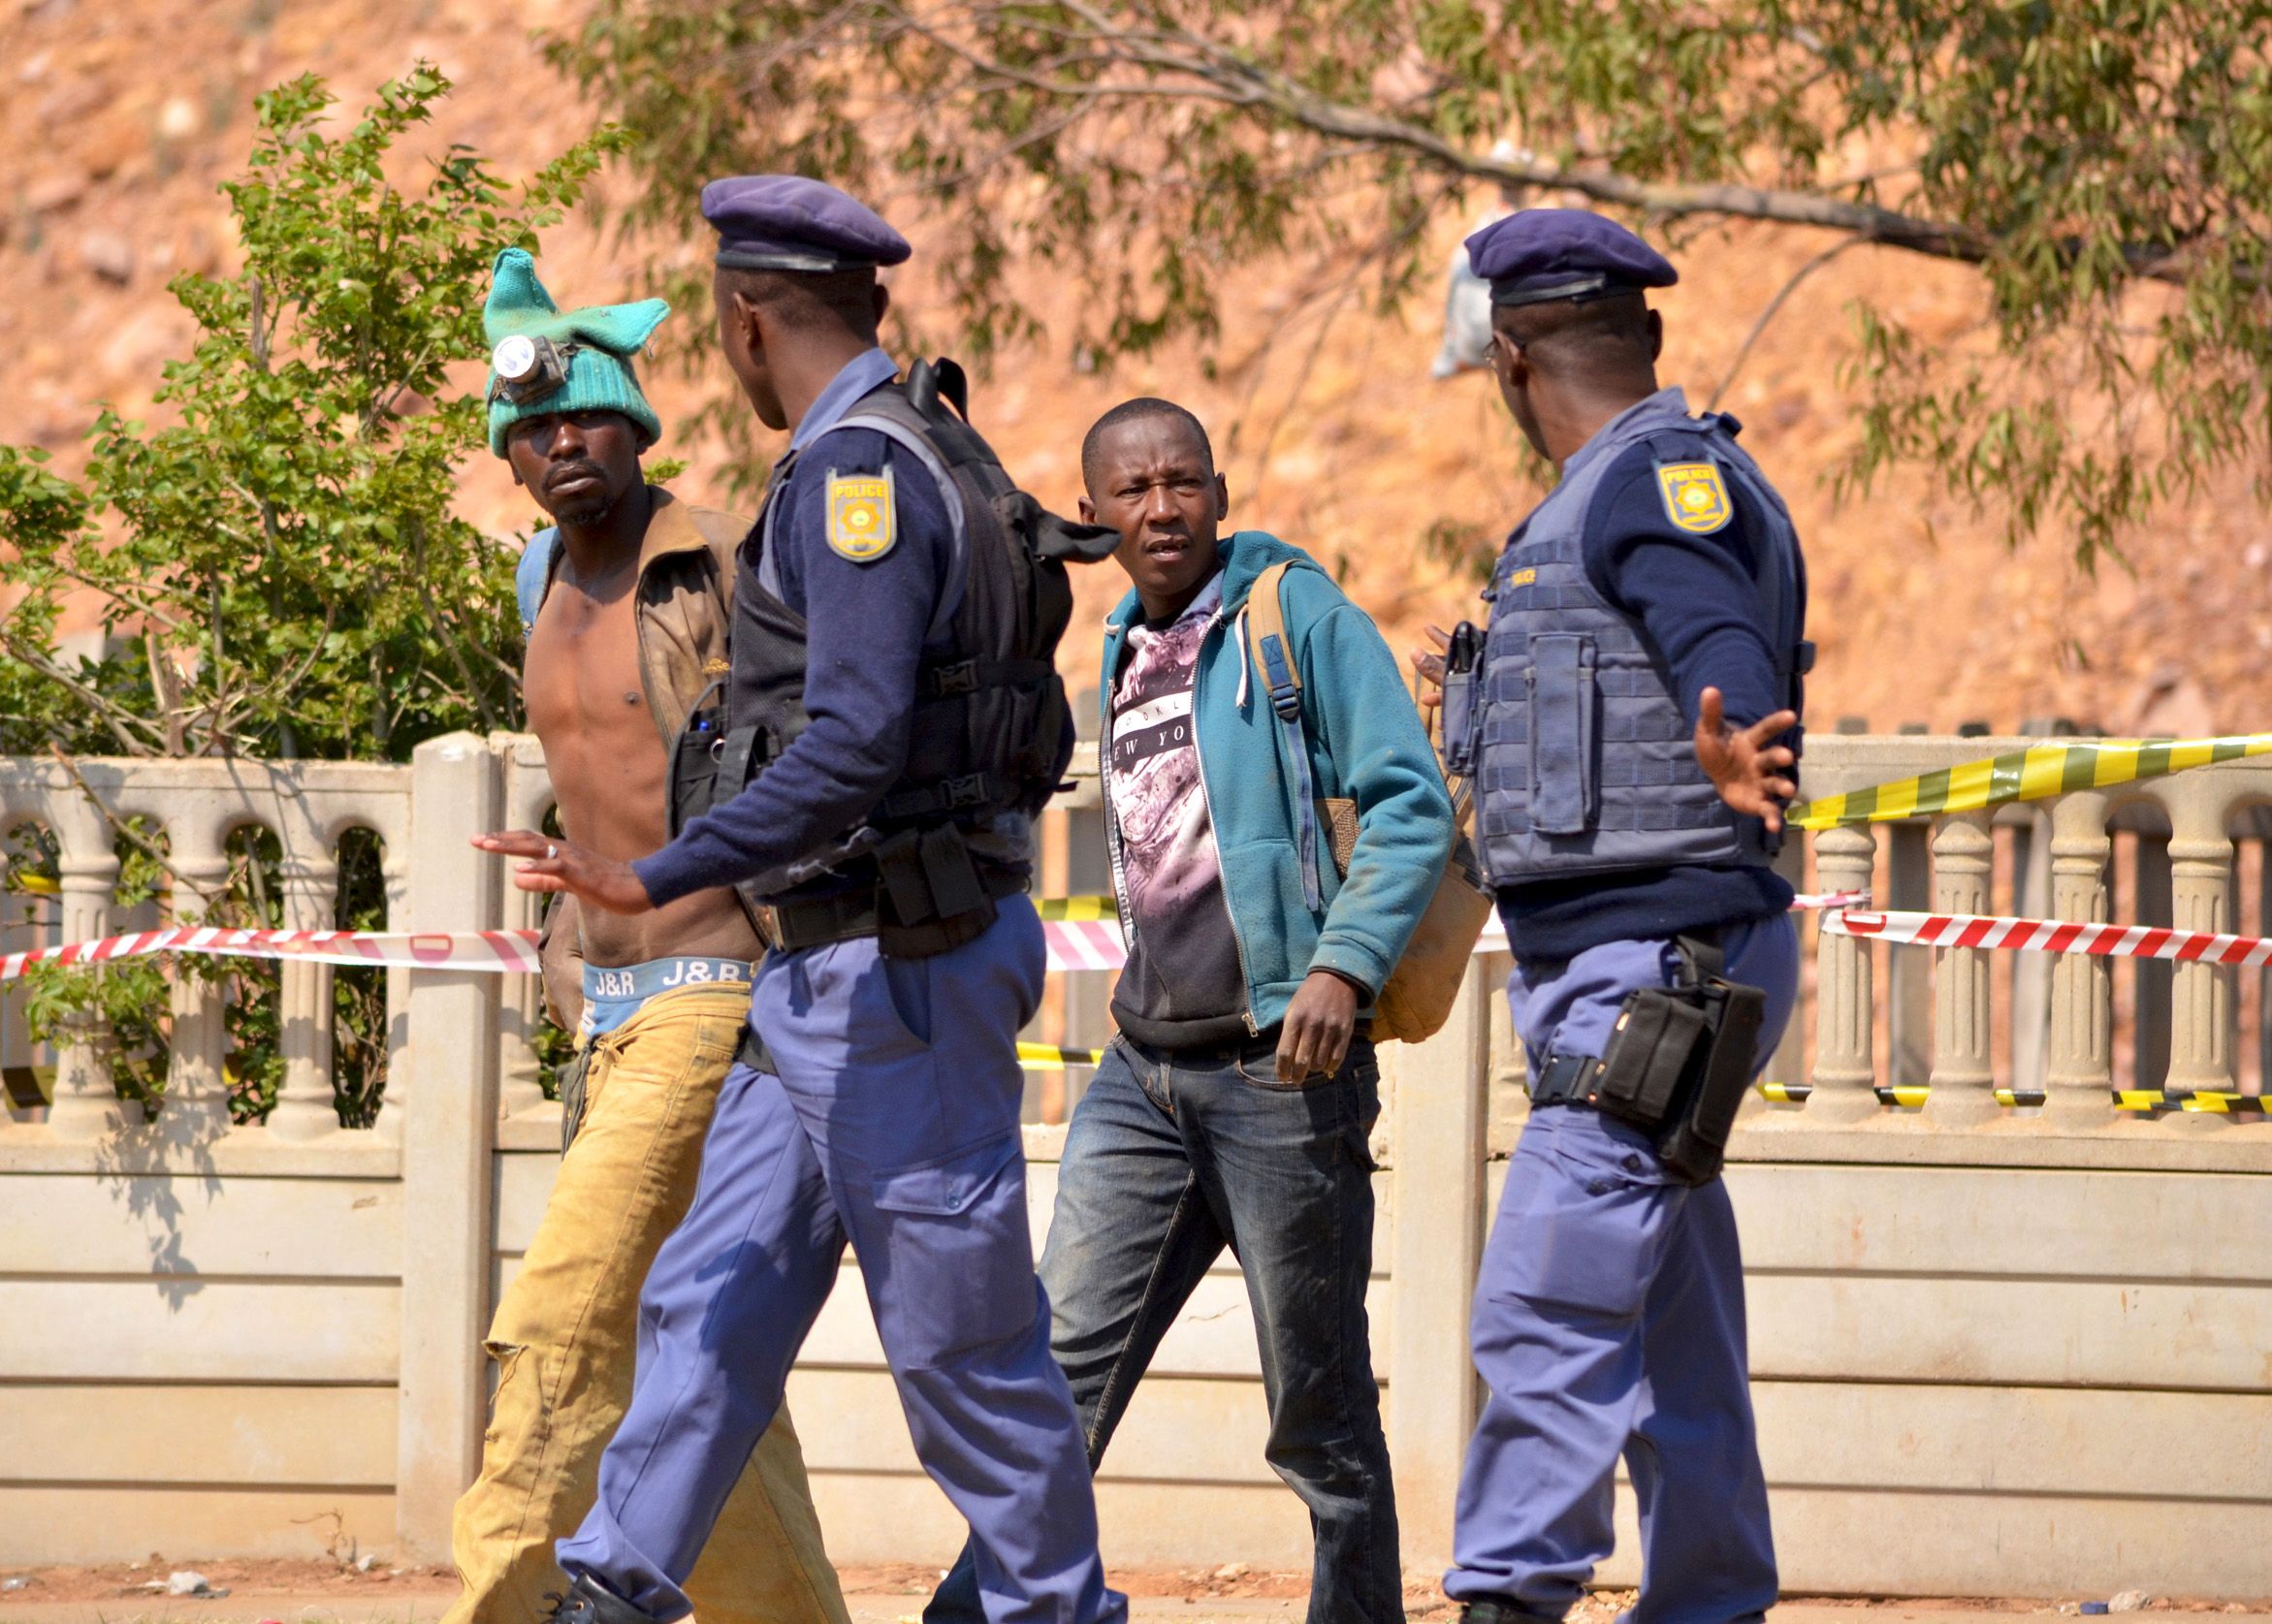 Alleged zama zamas are arrested by police in Johannesburg. Image by Mark Olalde. South Africa, 2017.
